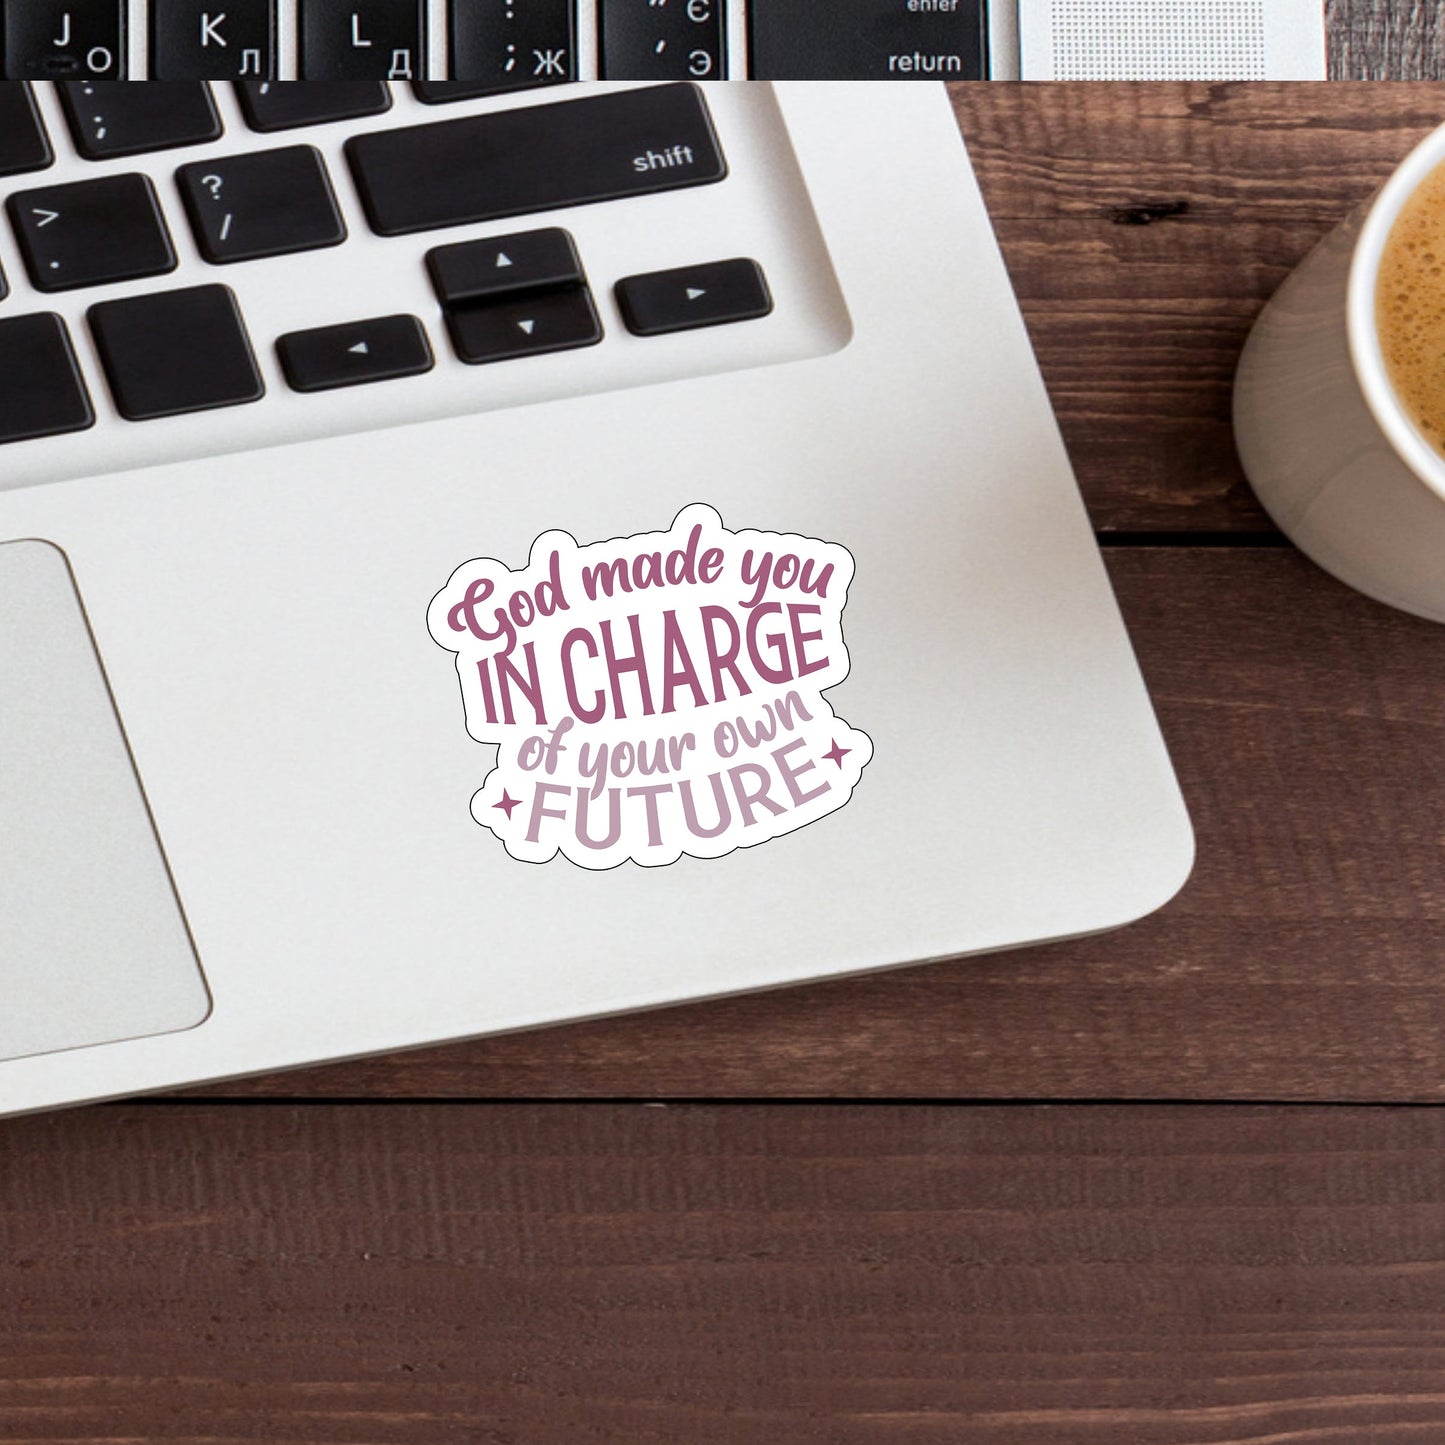 God made you in charge of your own future  Sticker,  Vinyl sticker, laptop sticker, Tablet sticker